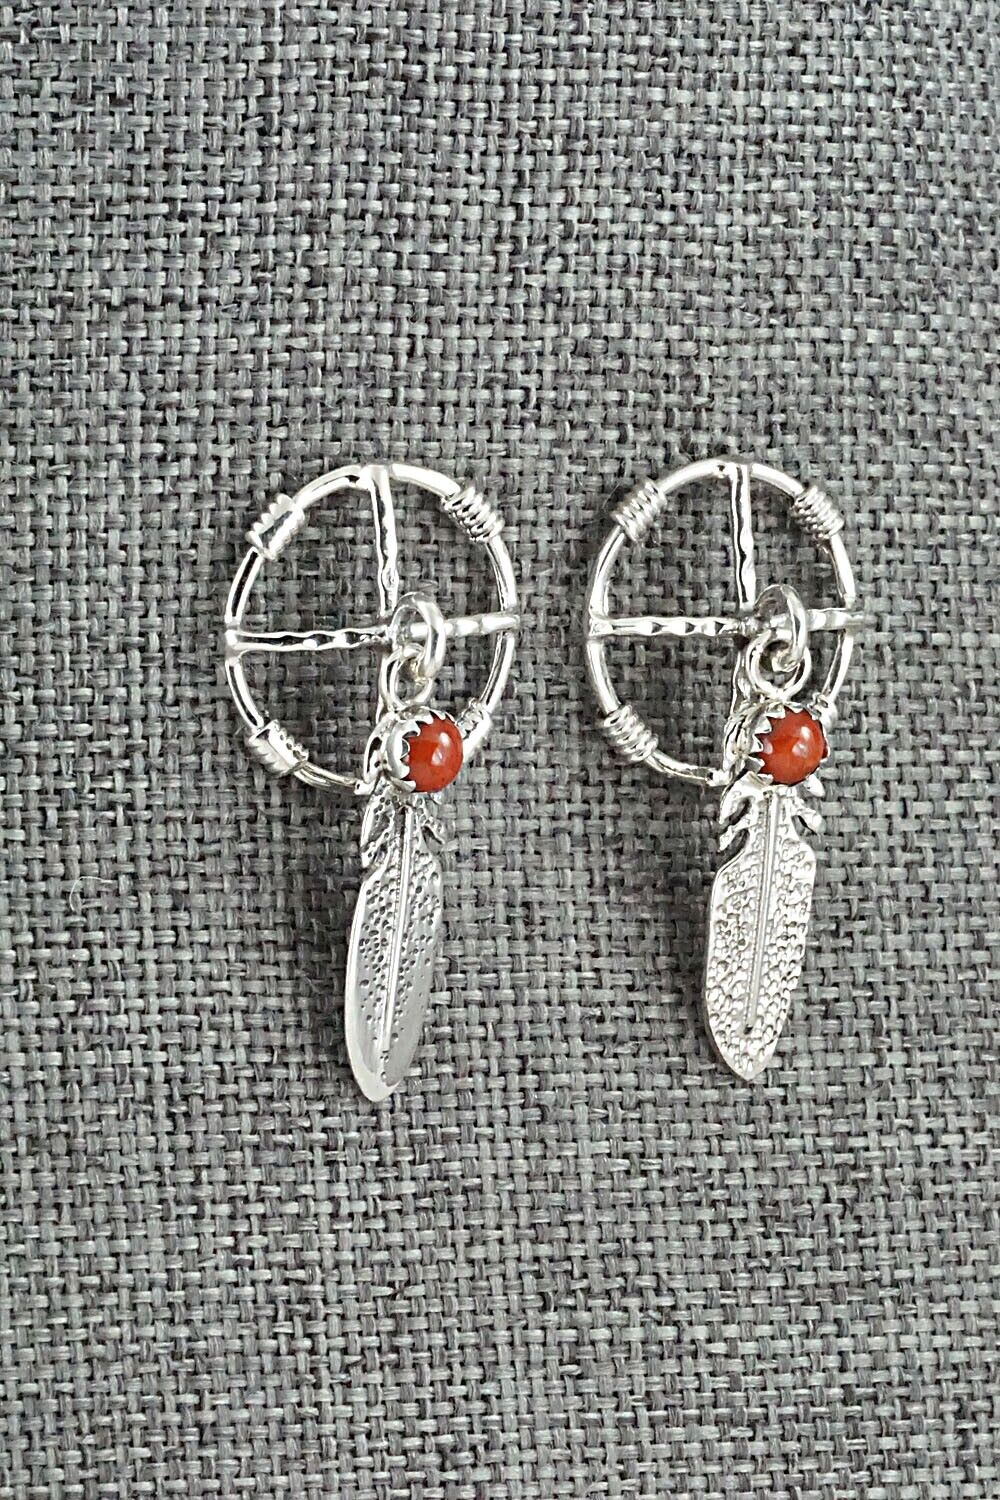 Coral & Sterling Silver Earrings - Elaine Shirley